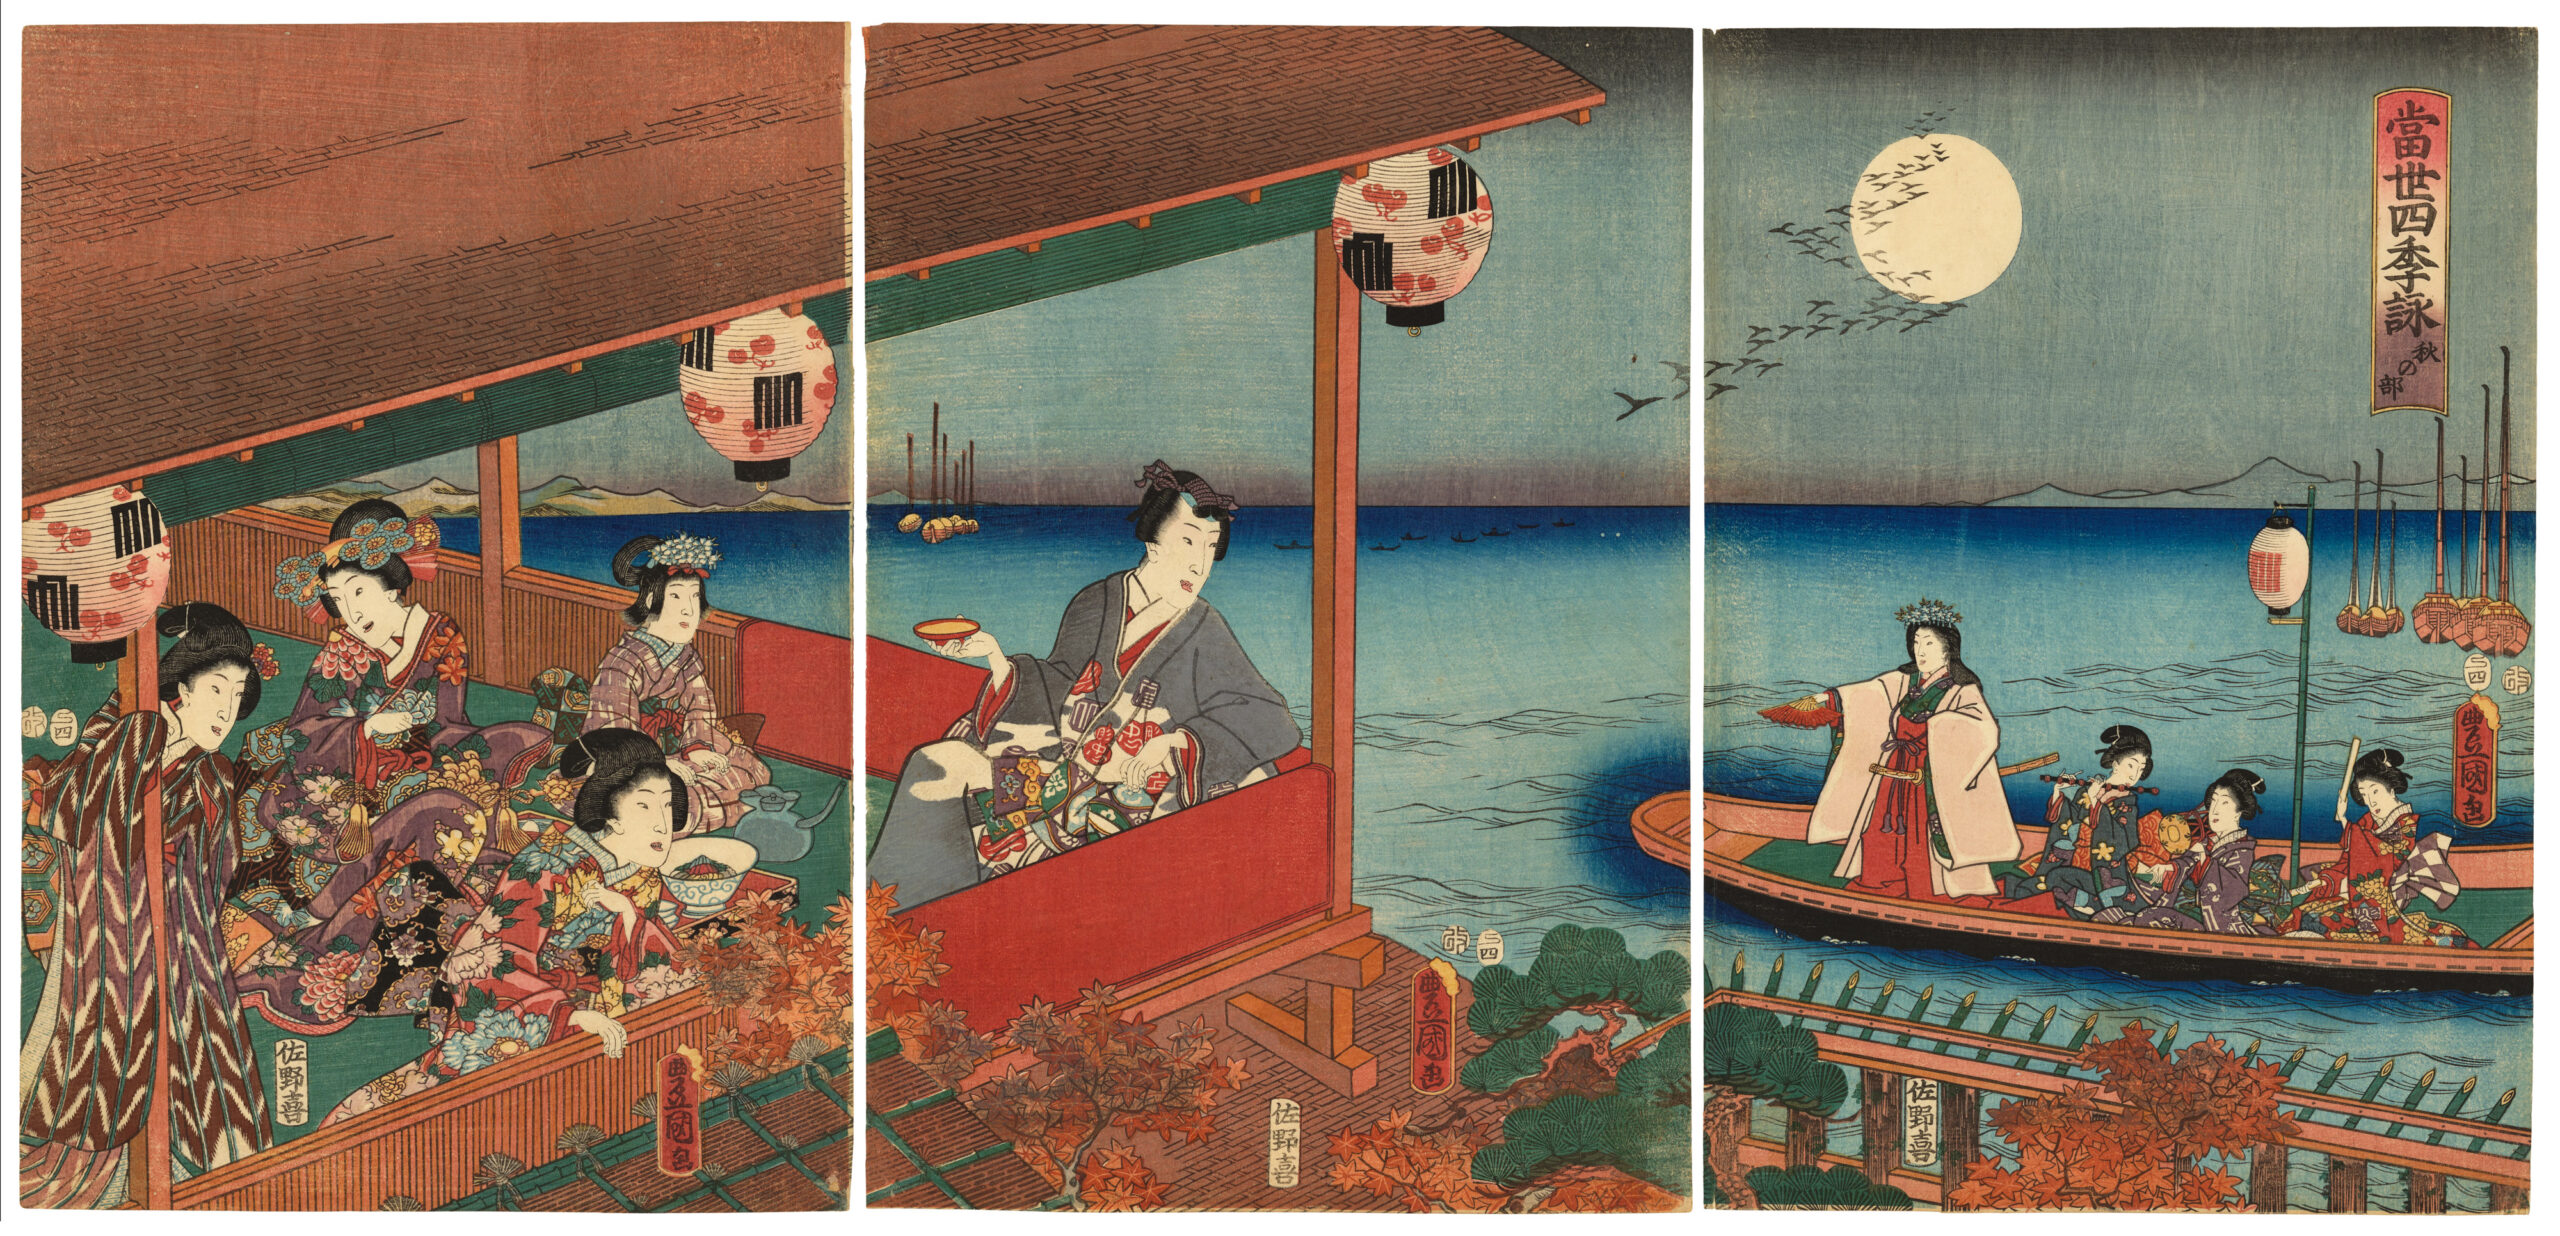 Utagawa Kunisada (1786-1865), 'Autumn Section', from the series 'Modern Views of the Four Seasons', woodblock print, triptych, 1857, 4th month, 36 x 25.3cm. (each sheet approx.)